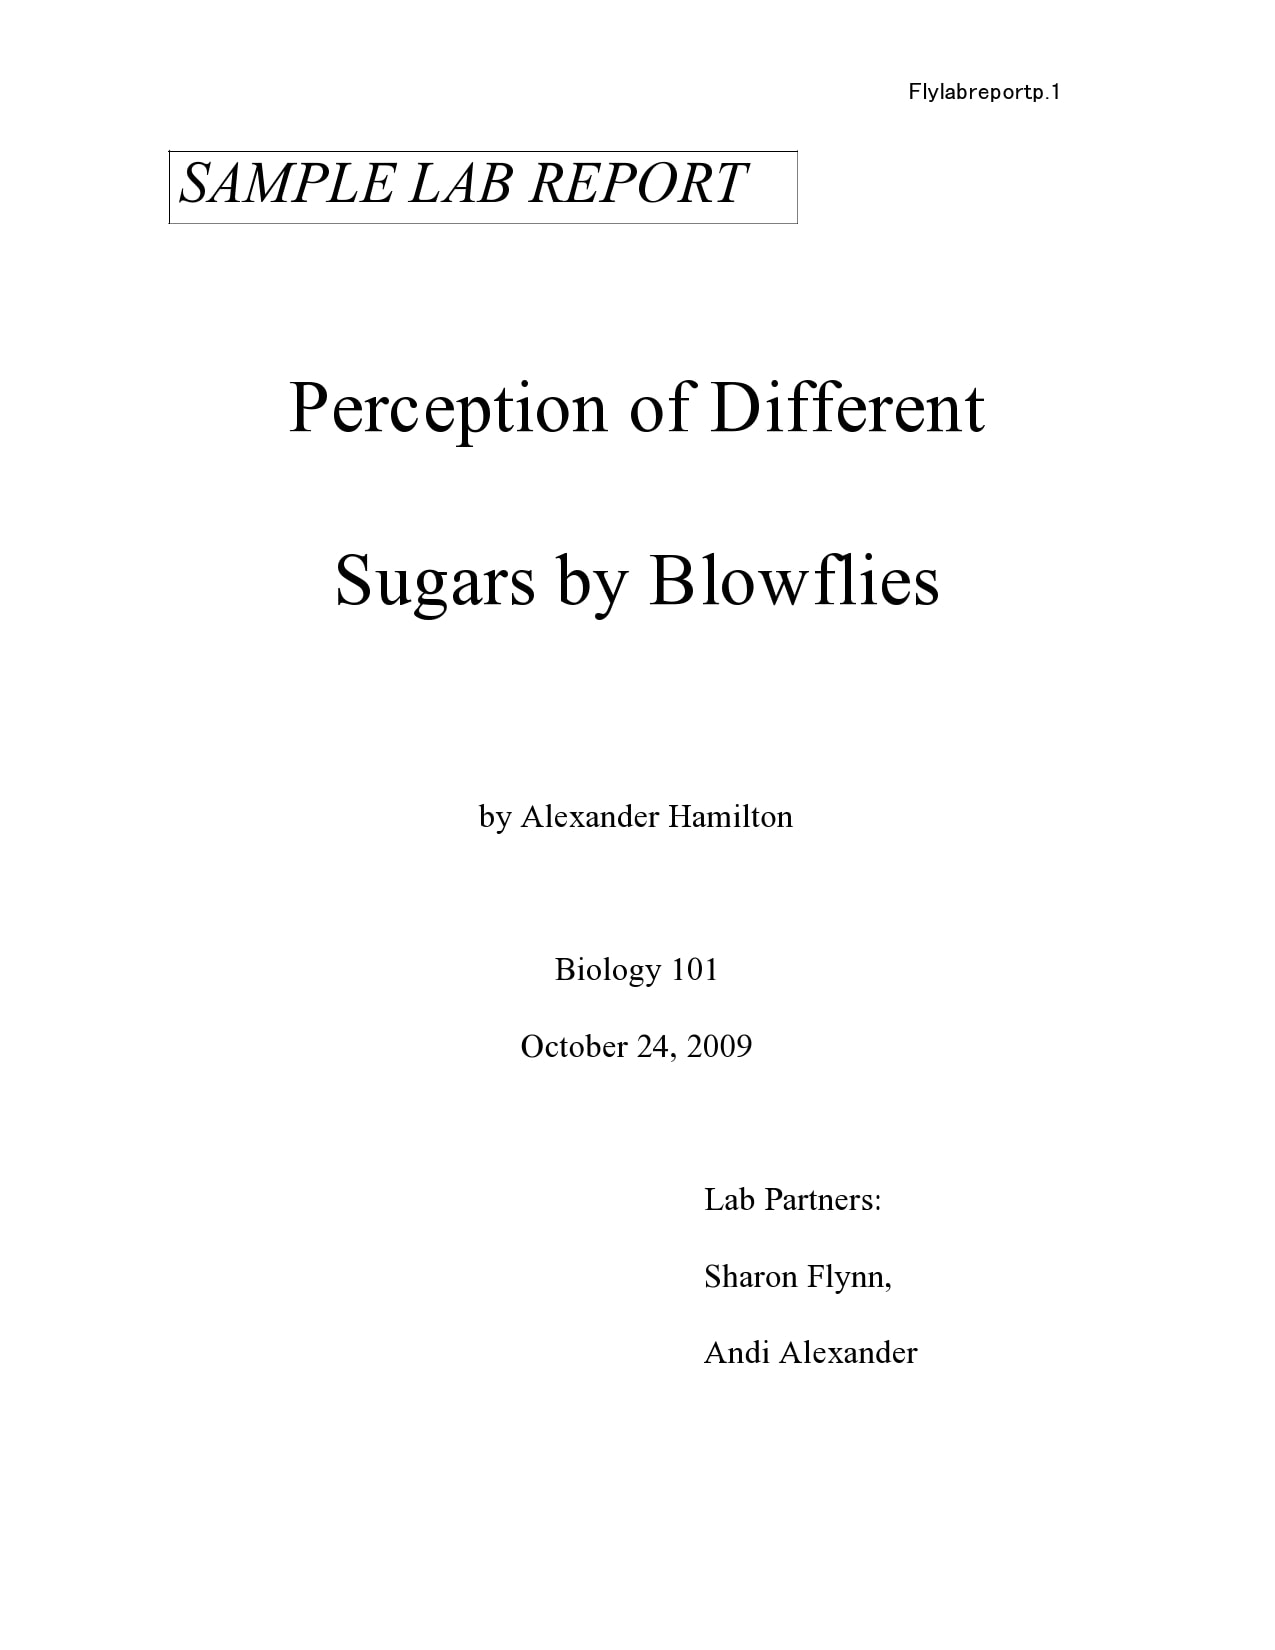 title page for lab report example